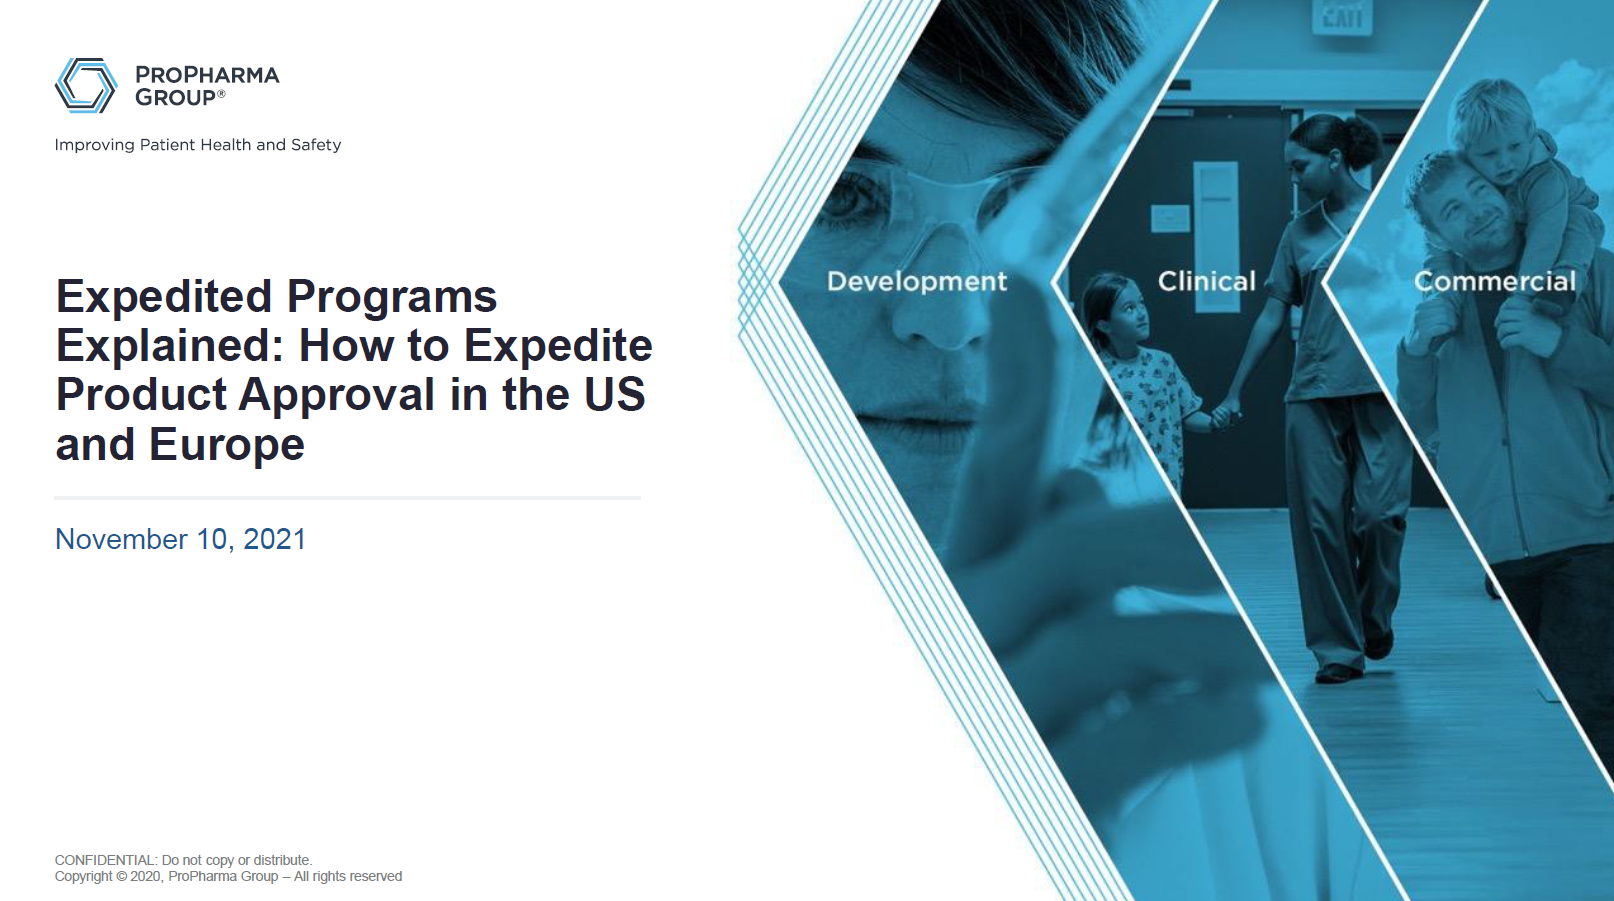 Expedited Programs Explained: How to Expedite Product Approval in the US and Europe